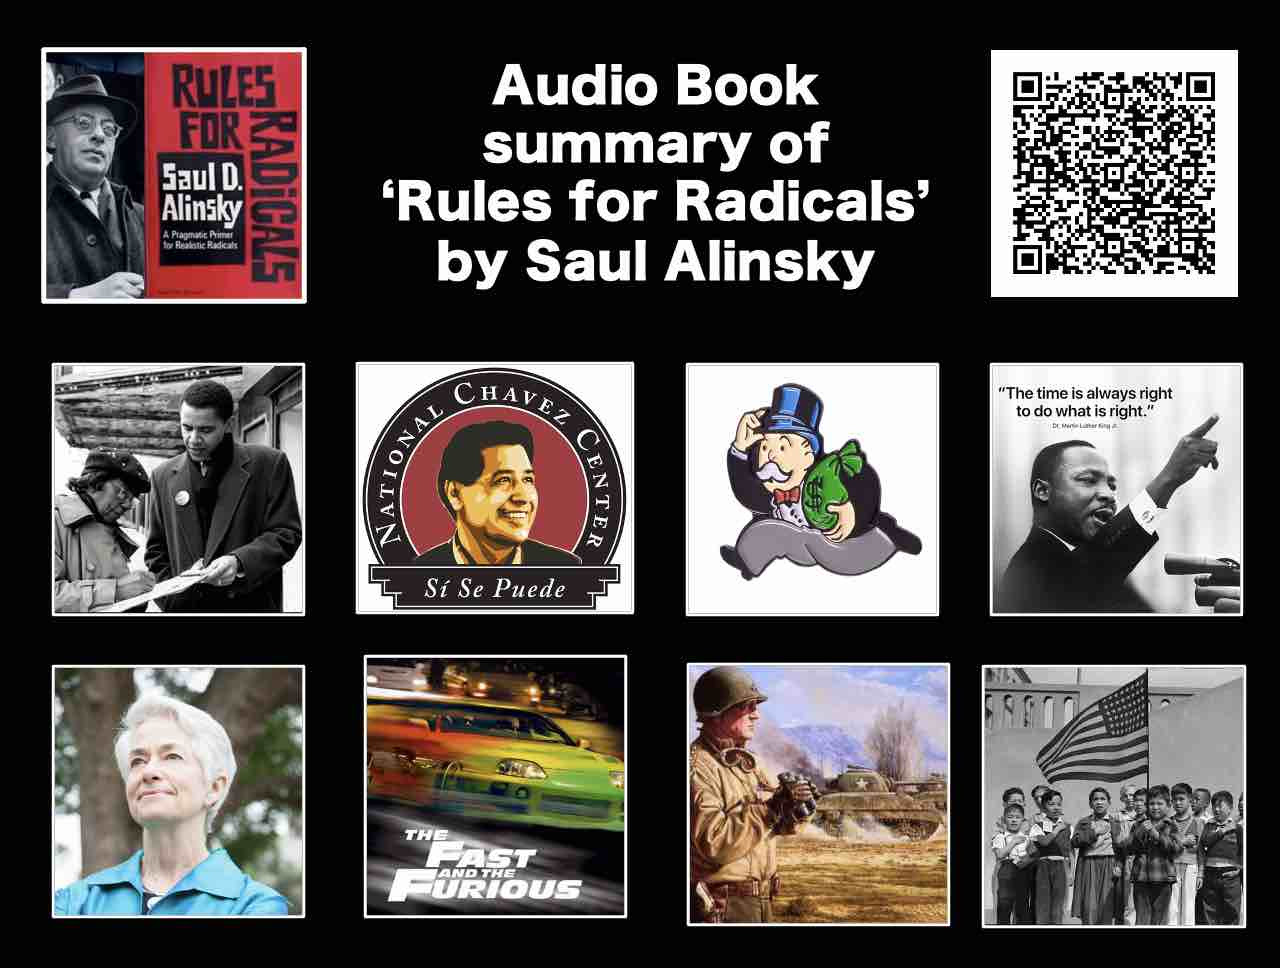 Audio book summary of Rules For Radicals by Saul Alinsky